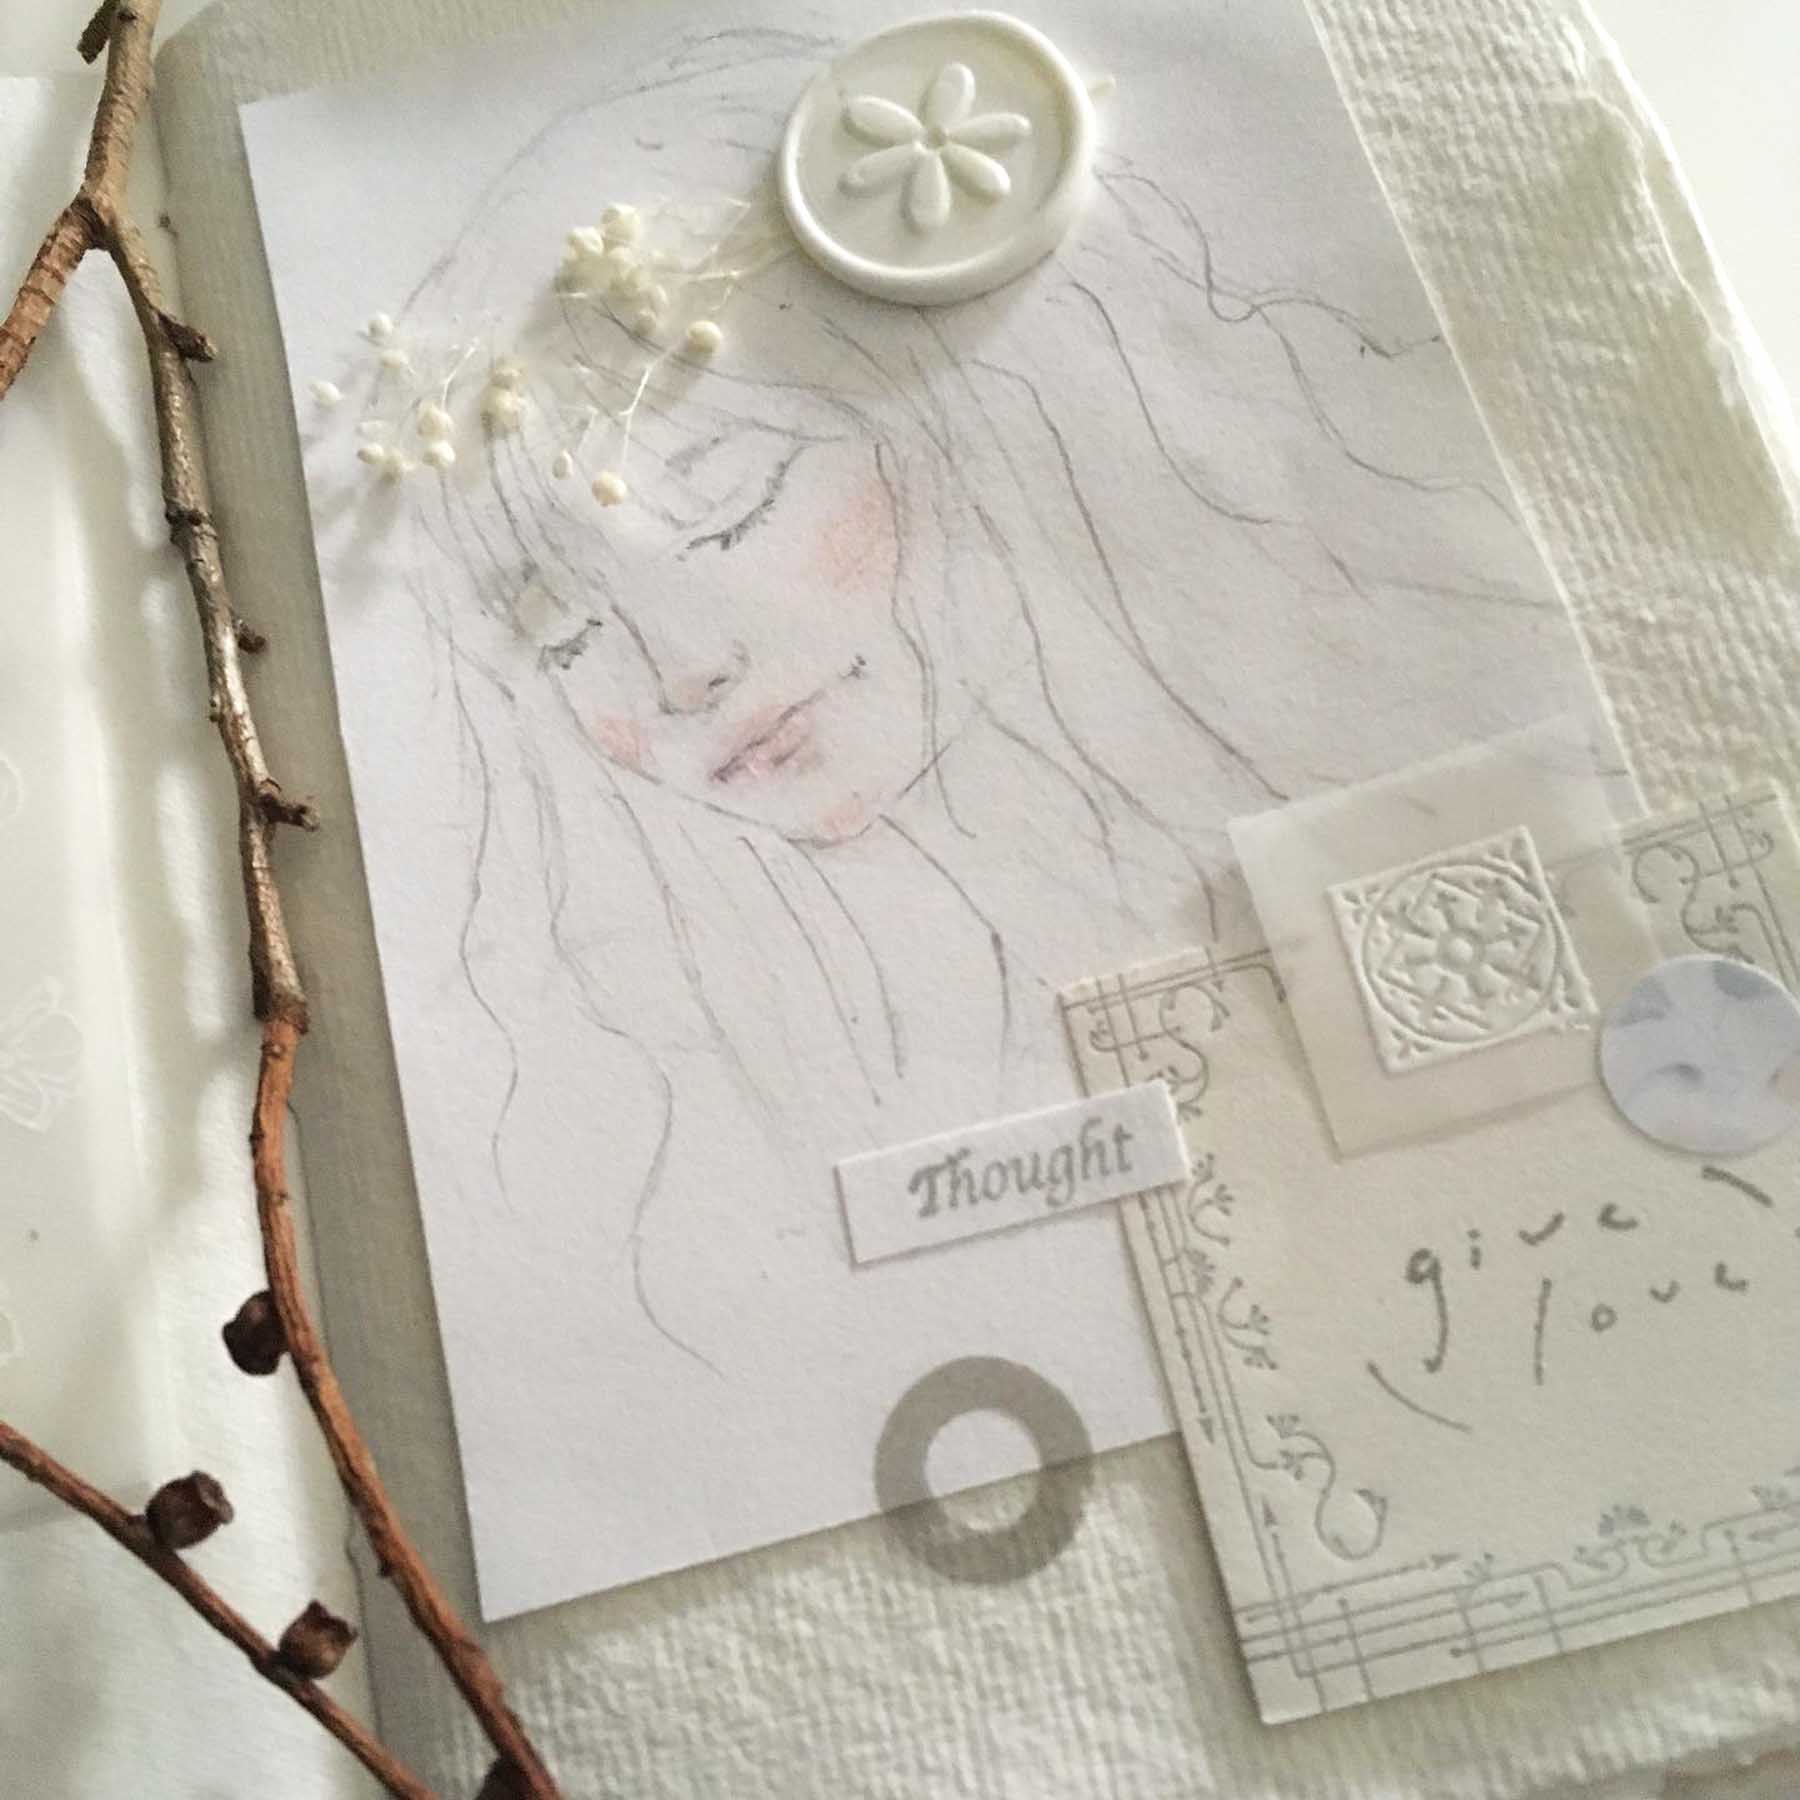 Daisy wax seal journal art with dried flowers